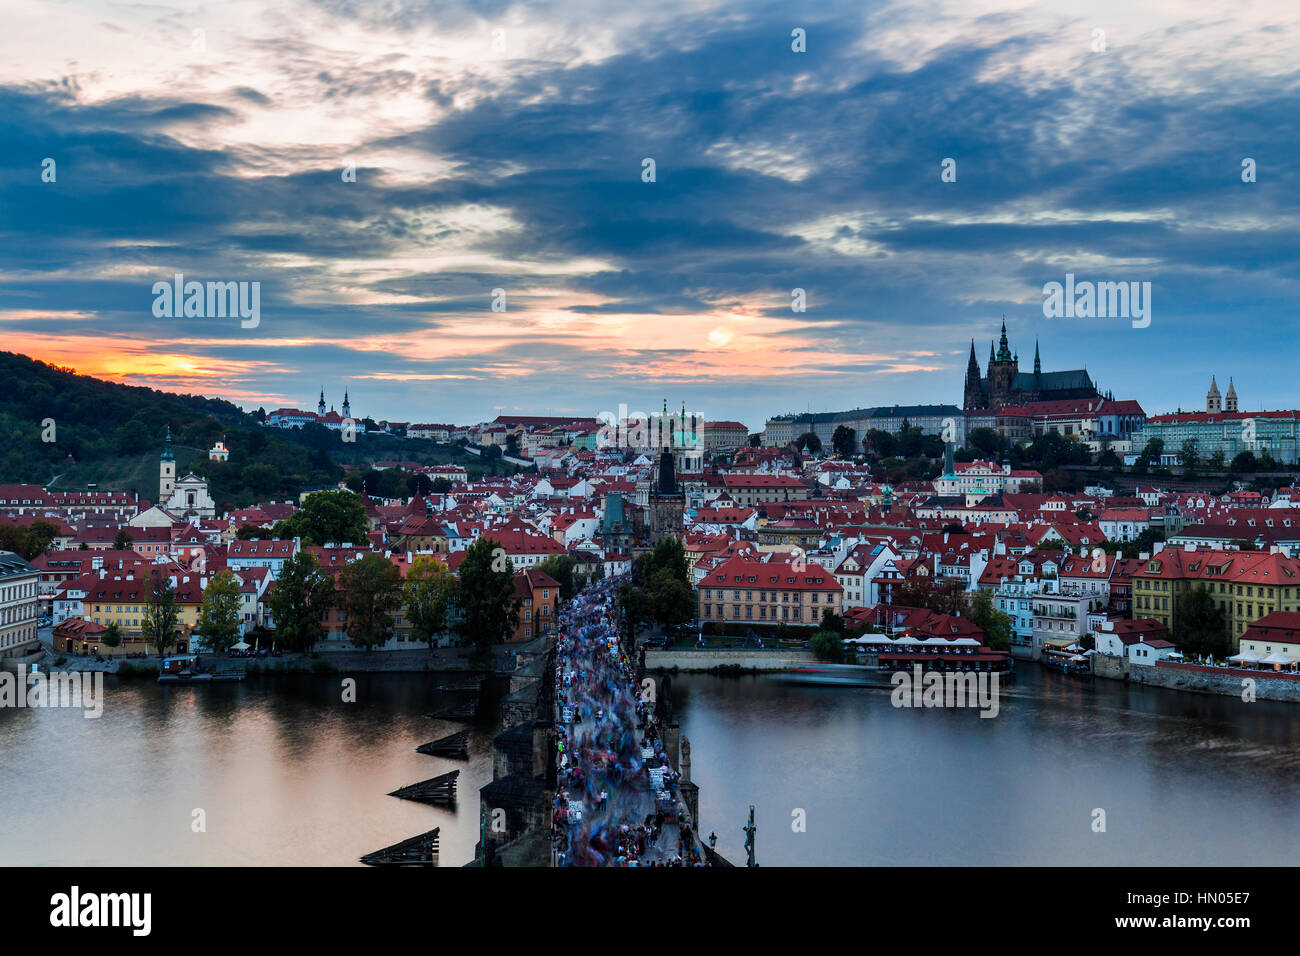 Charles Bridge (Karluv Most) is Prague most familiar monument, connects the Old Town (Stare Mesto) with the Little Quarter Stock Photo